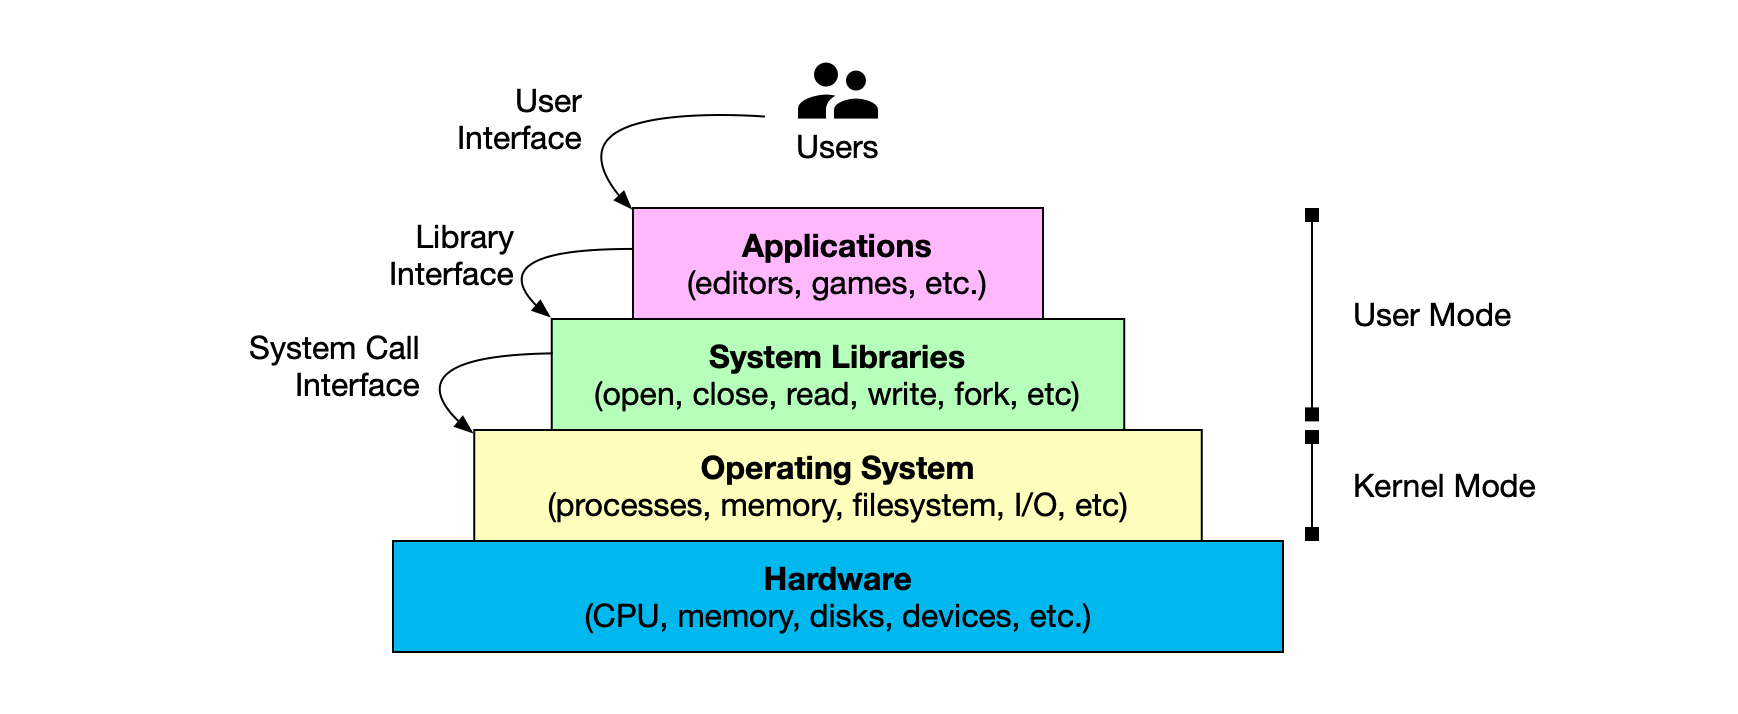 Communication between applications and operating systems is done through system libraries and well-defined APIs.